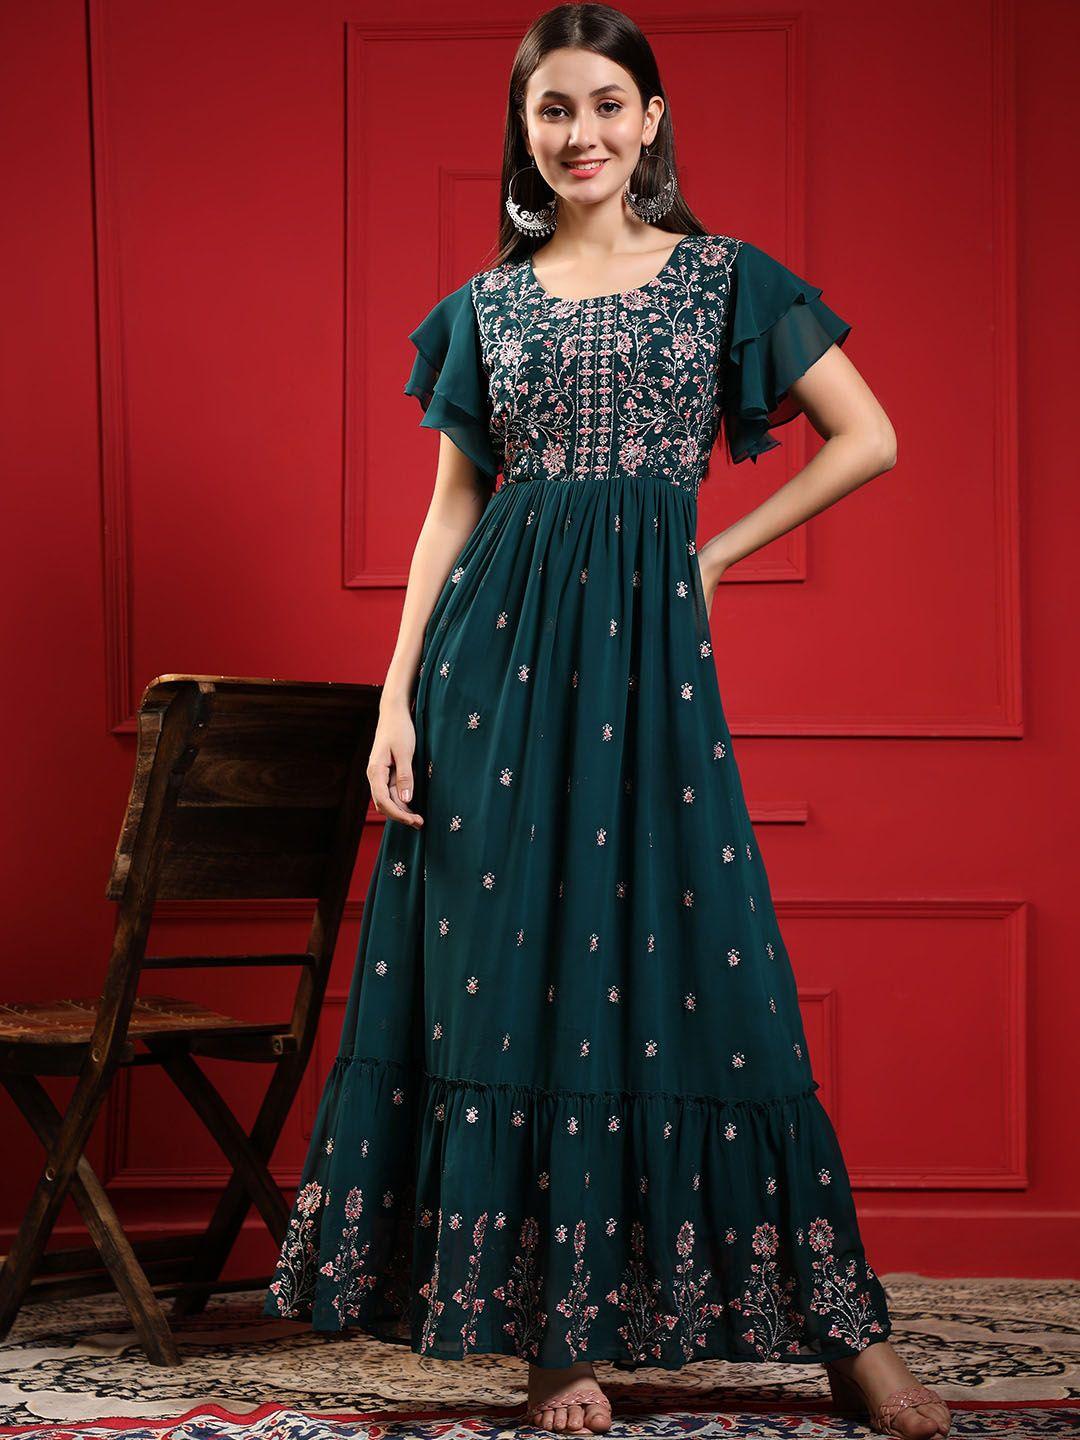 black-scissor-floral-embroidered-flared-sleeves-gathered-georgette-maxi-ethnic-dresses